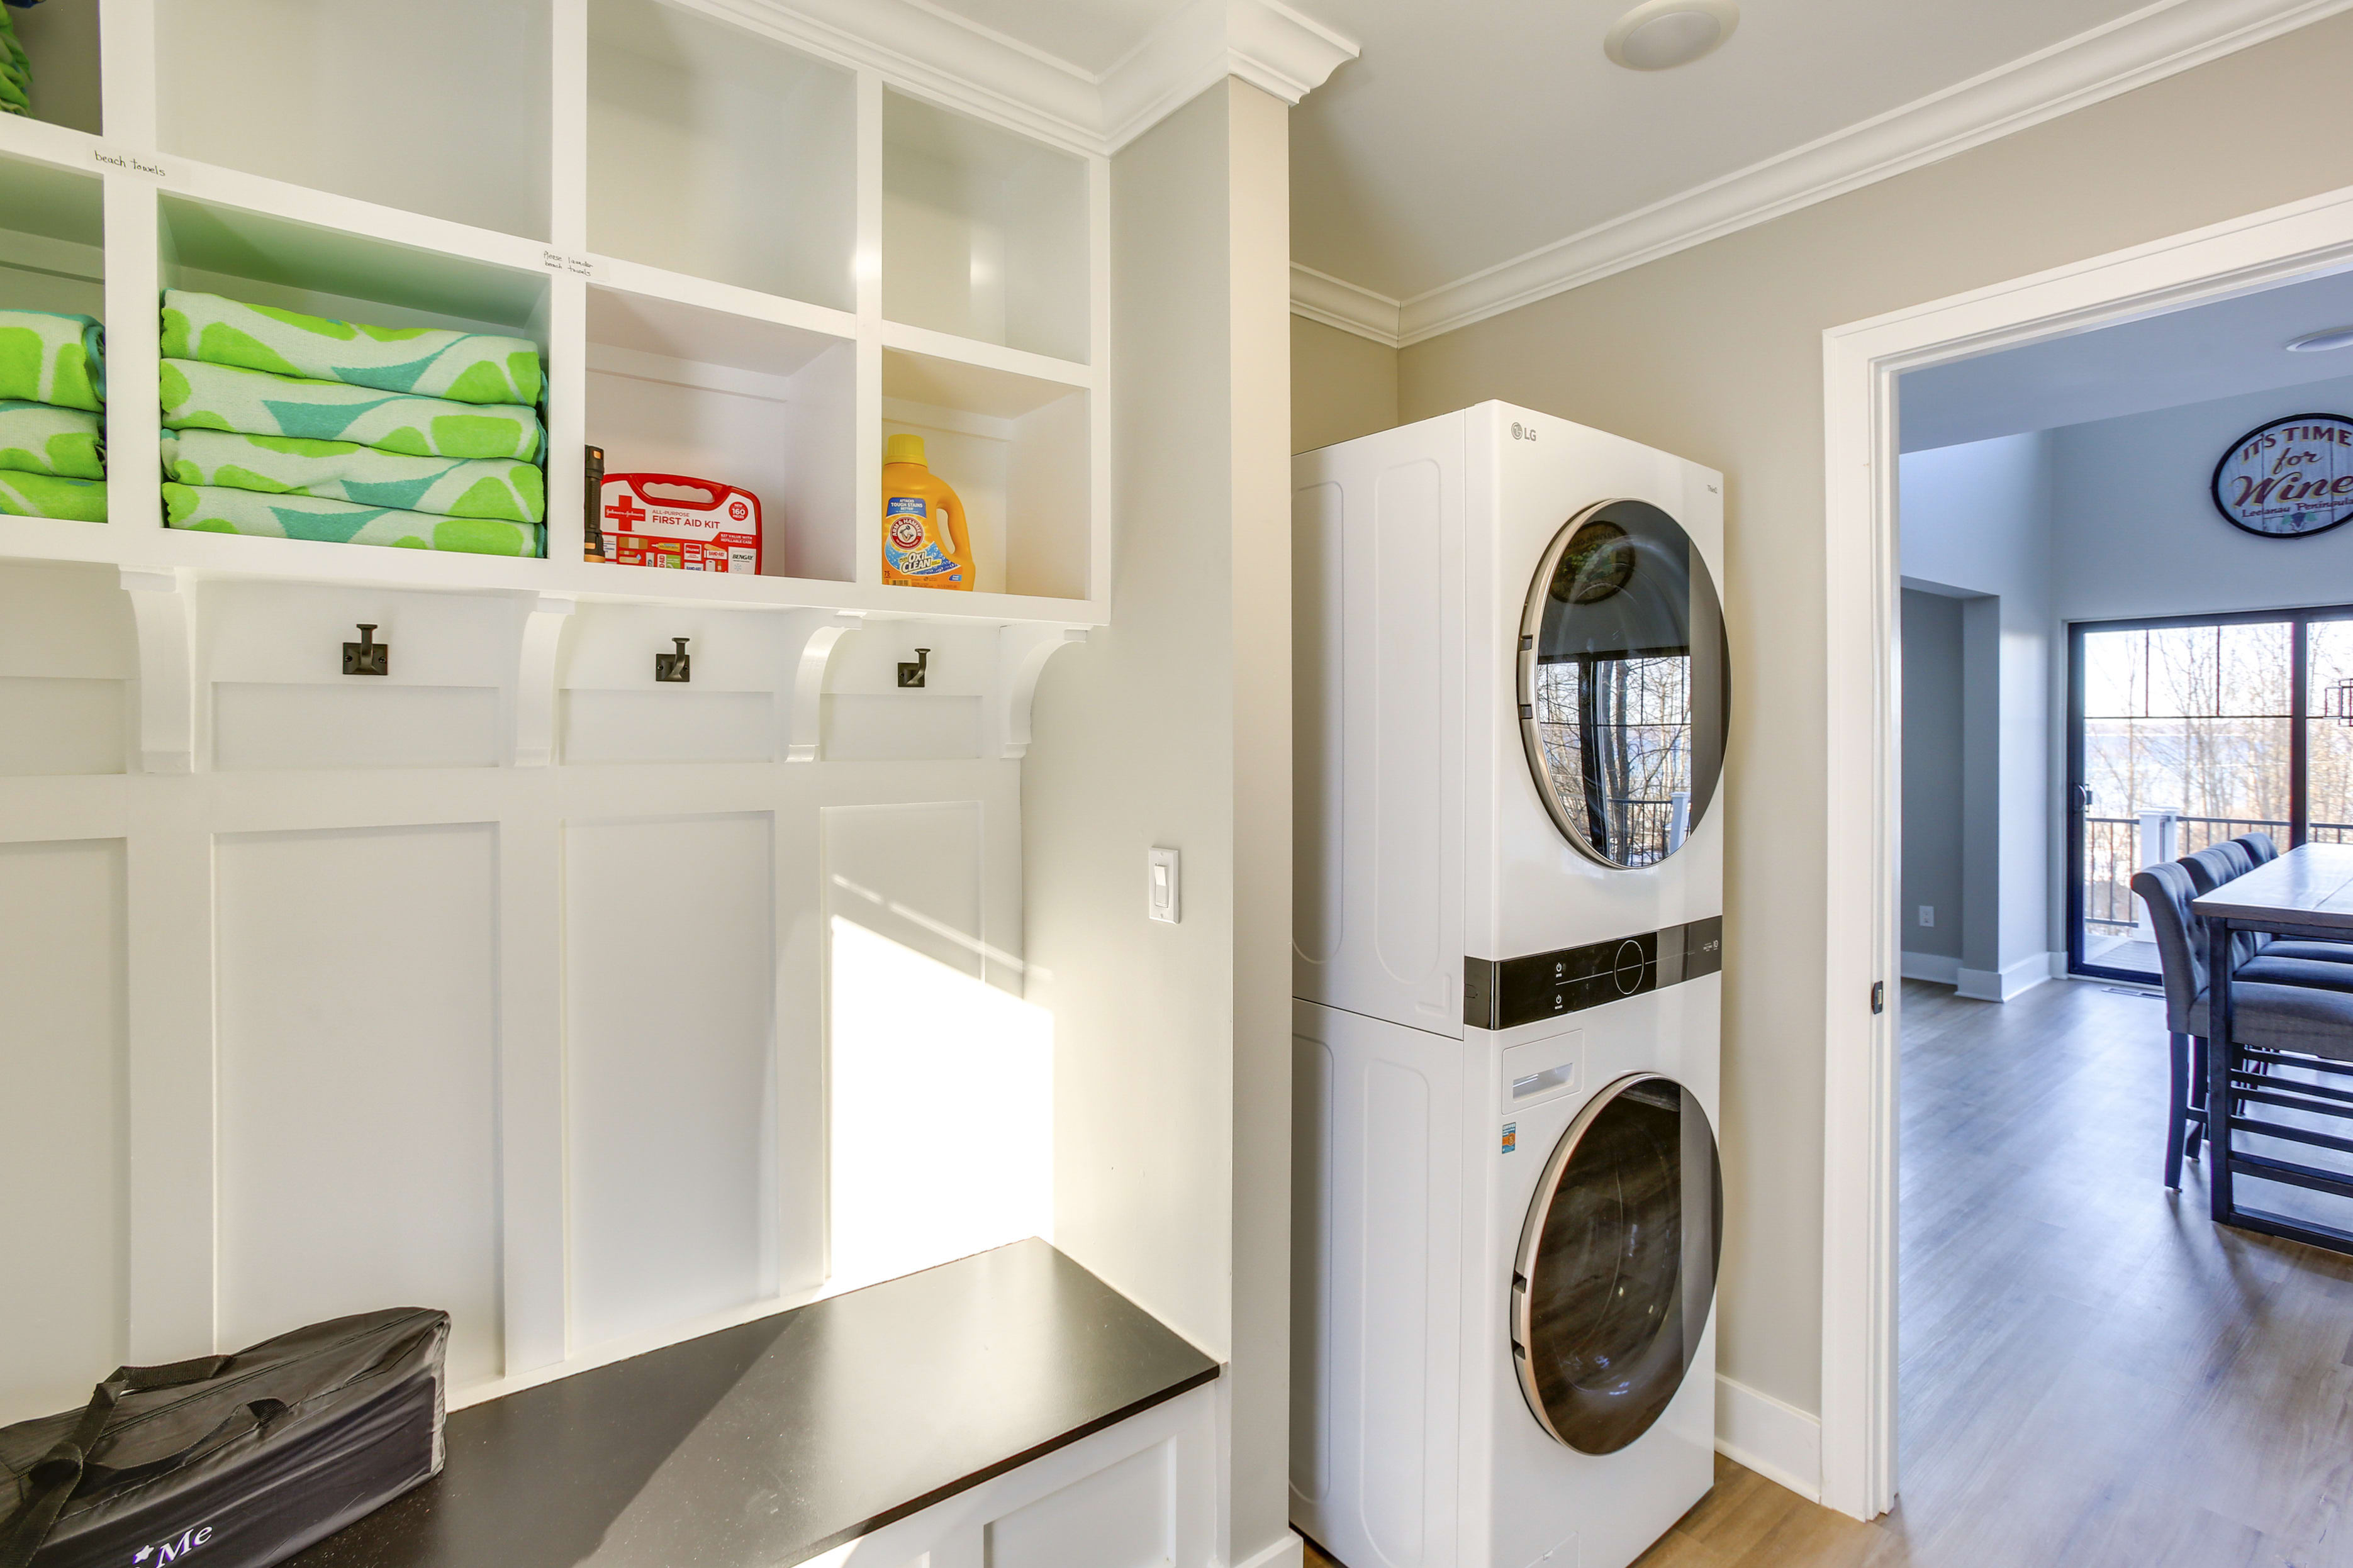 Laundry Area | Detergent Provided